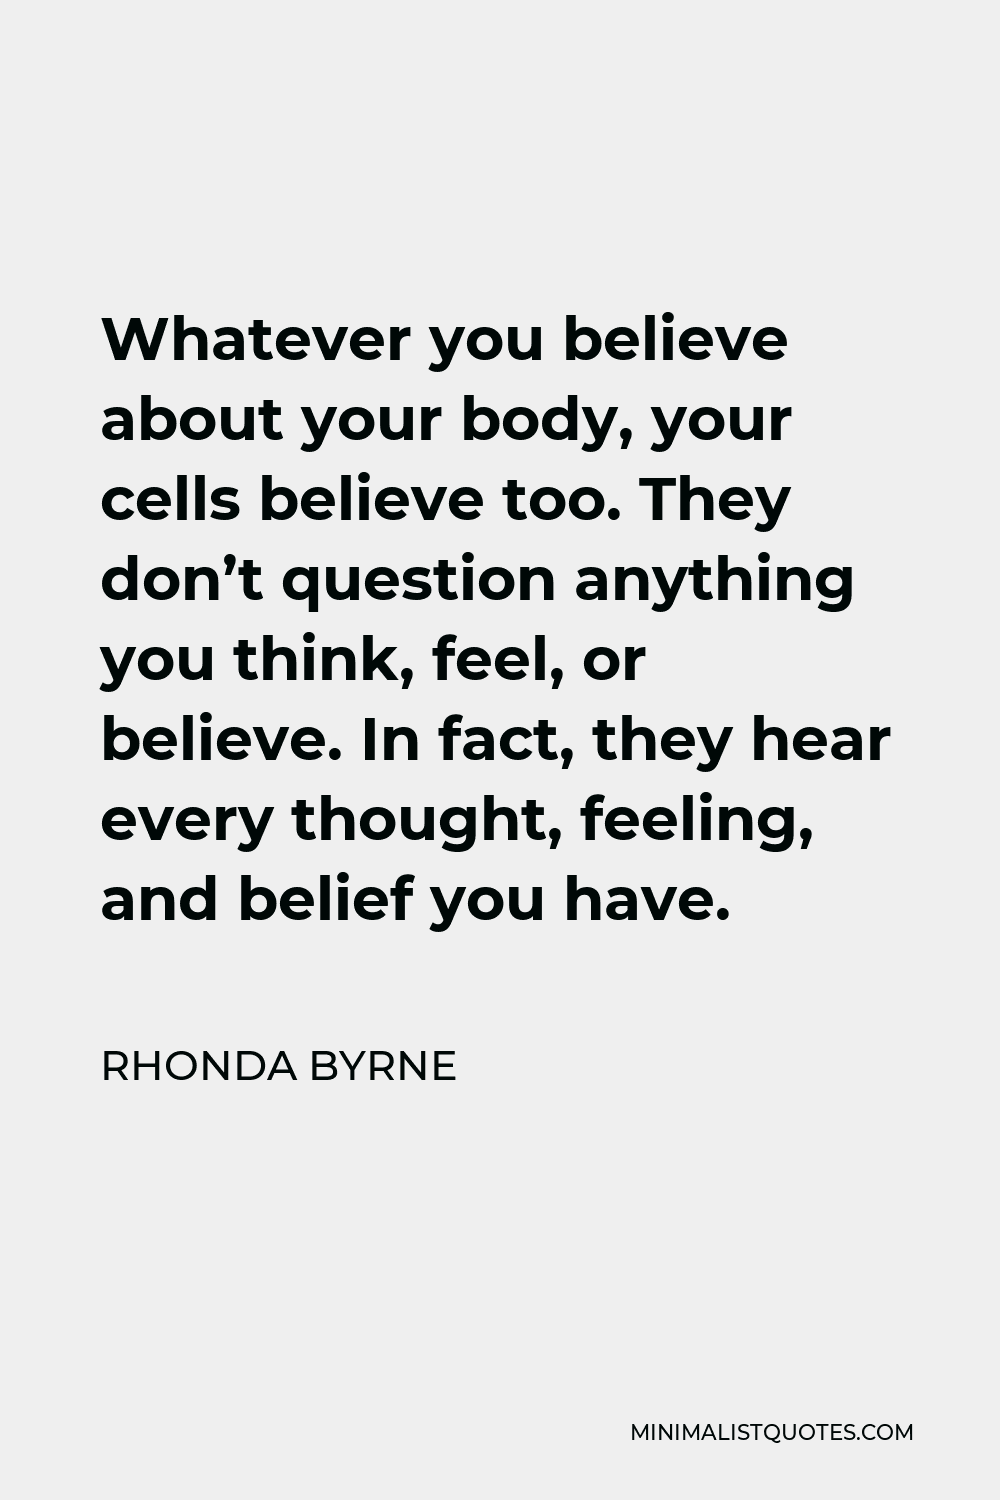 Rhonda Byrne Quote - Whatever you believe about your body, your cells believe too. They don’t question anything you think, feel, or believe. In fact, they hear every thought, feeling, and belief you have.